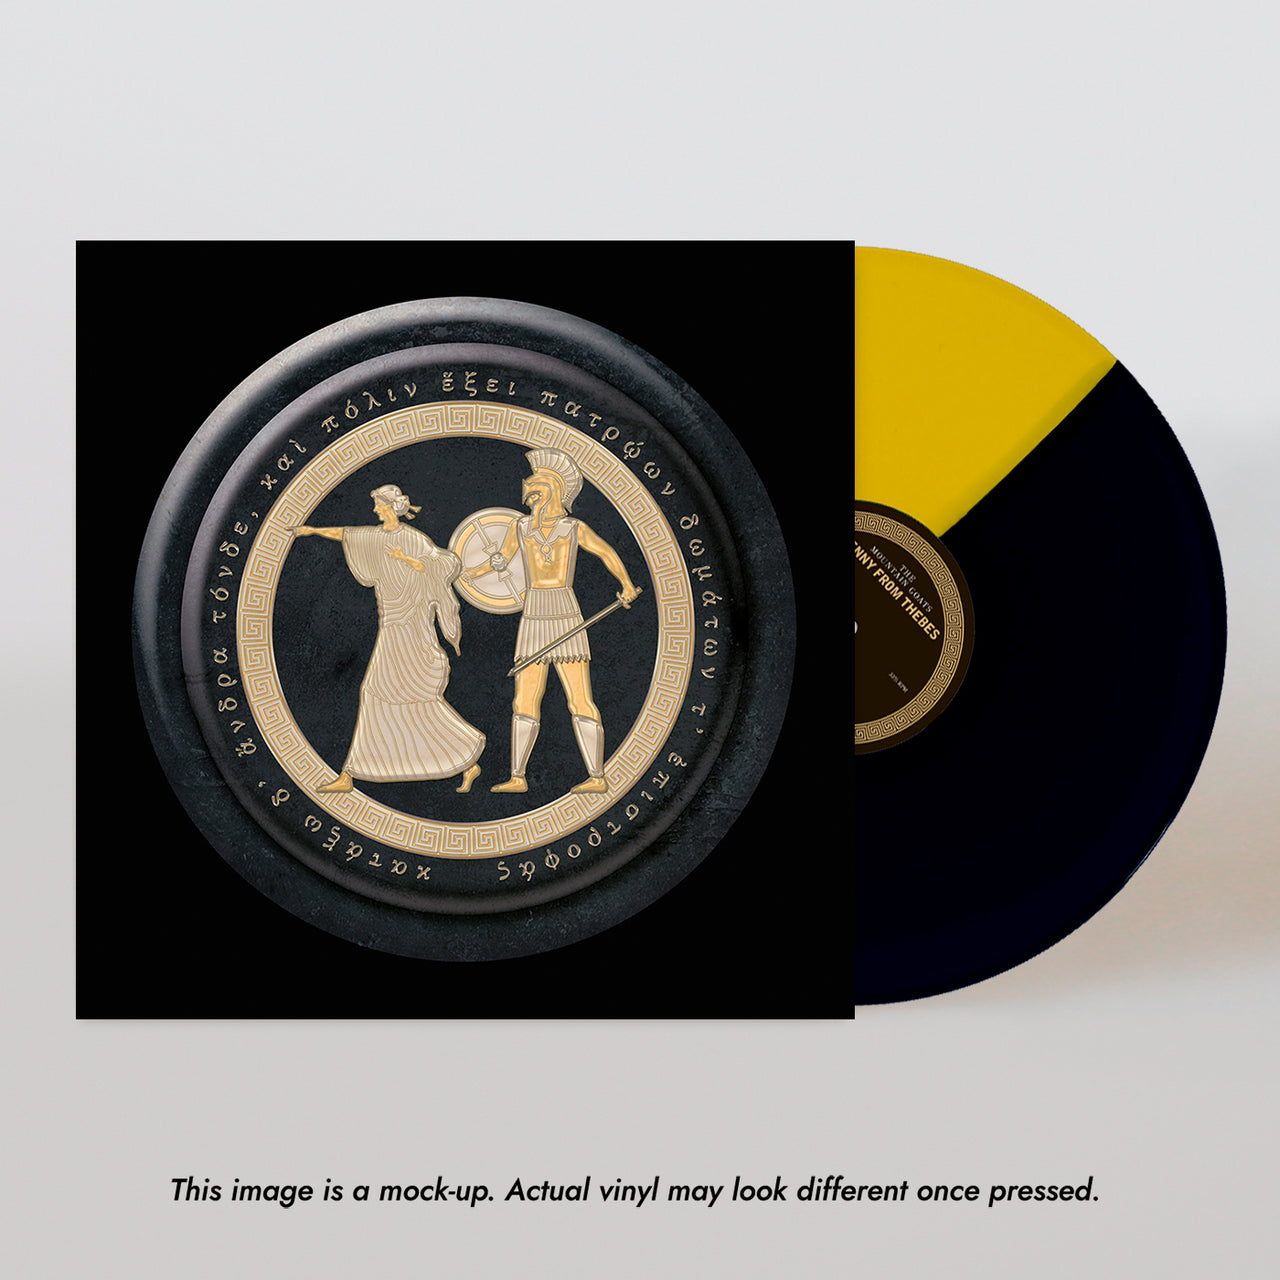 The Mountain Goats: Jenny From Thebes Vinyl LP (Black & Yellow)